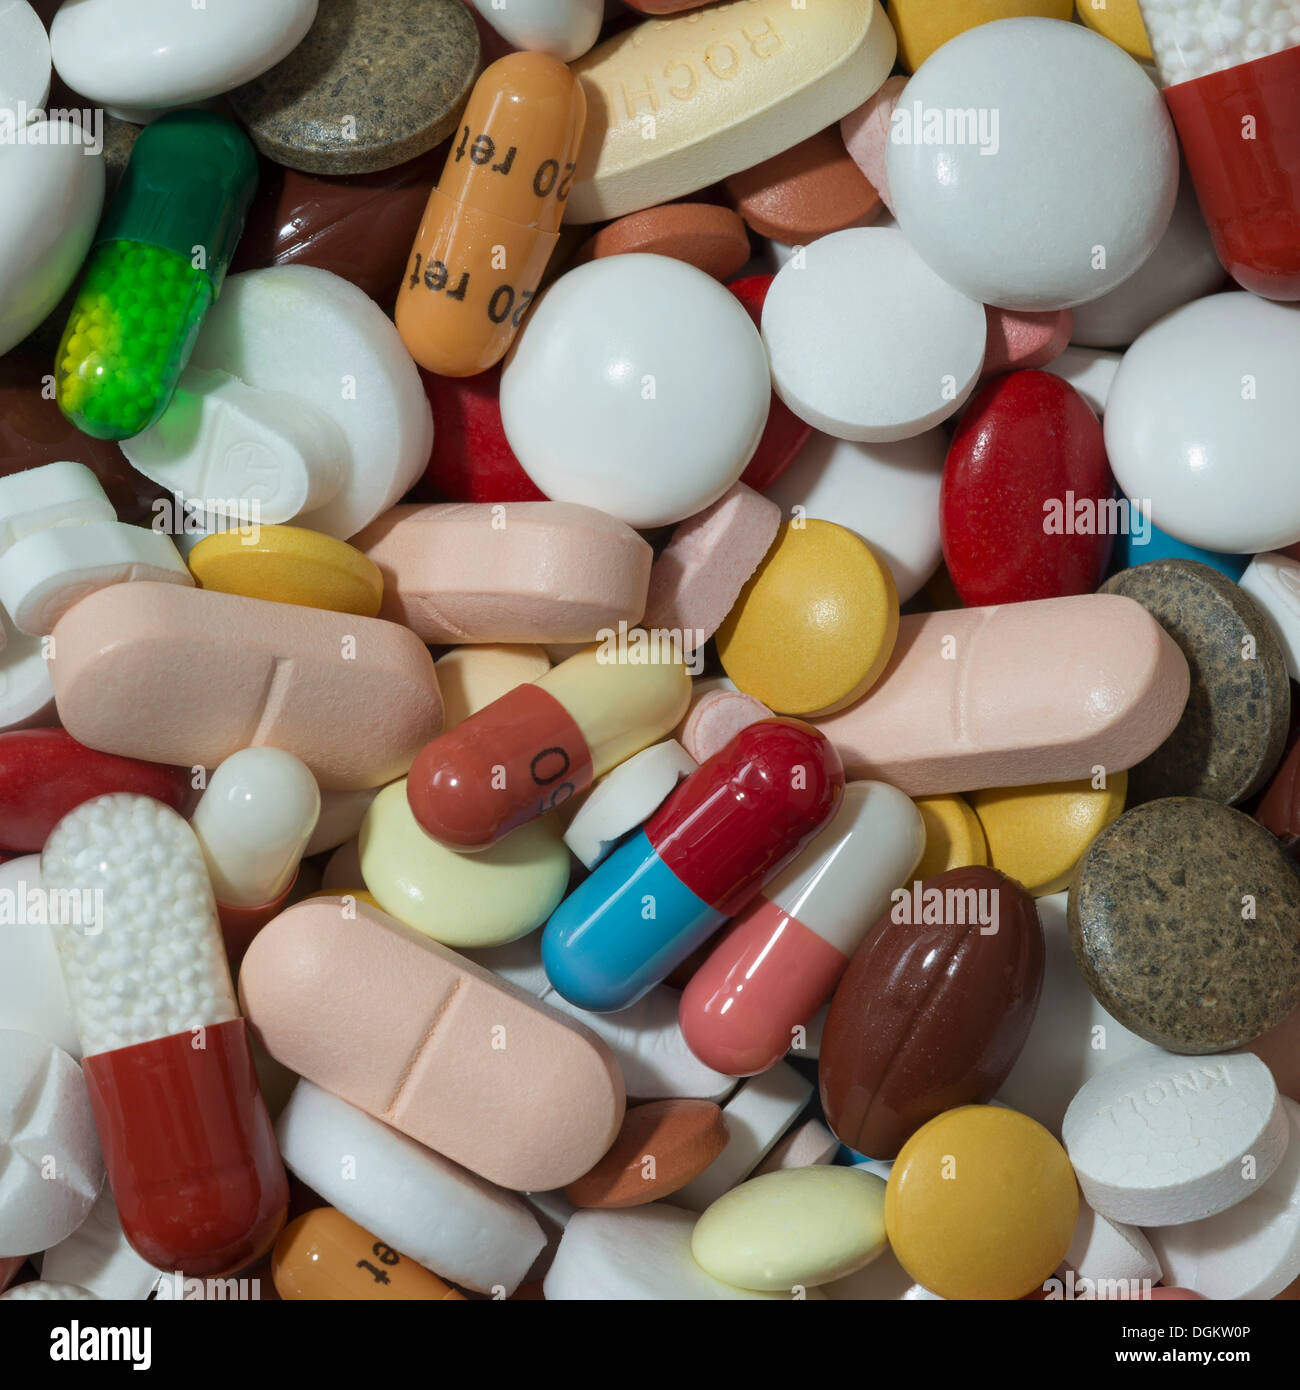 Mixed coloured pills, capsules, tablets and coated tablets, Germany Stock Photo